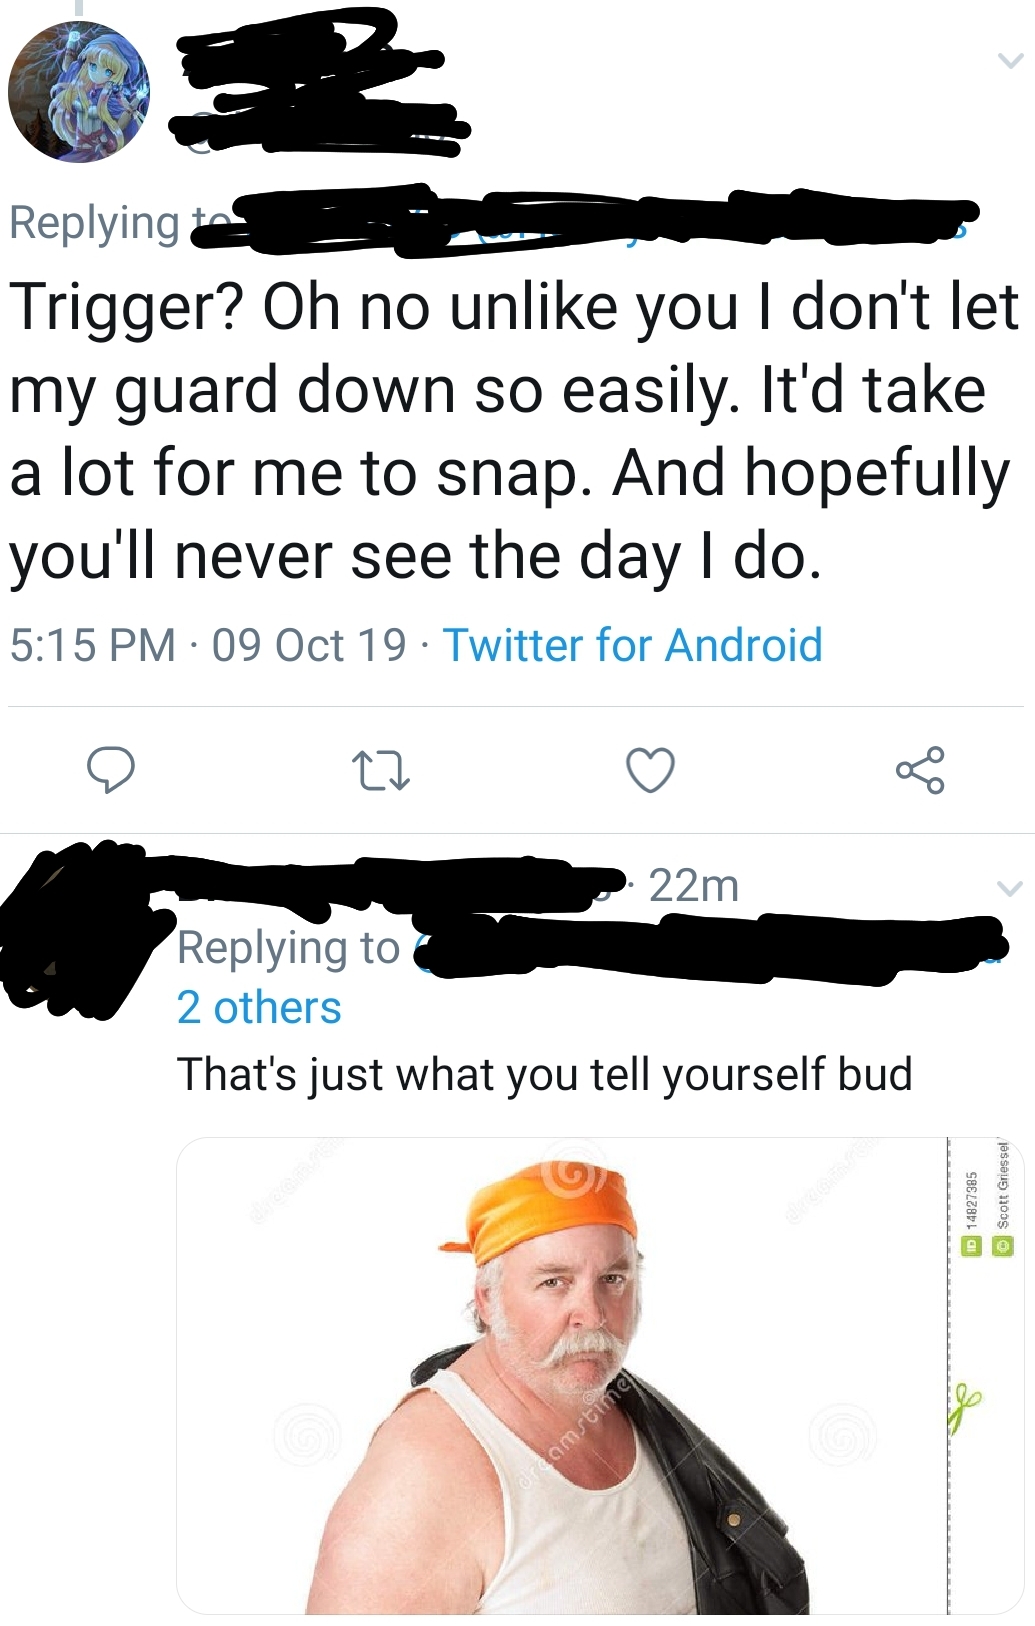 cap - Trigger? Oh no un you I don't let my guard down so easily. It'd take a lot for me to snap. And hopefully you'll never see the day I do. 09 Oct 19. Twitter for Android 22m 2 others That's just what you tell yourself bud